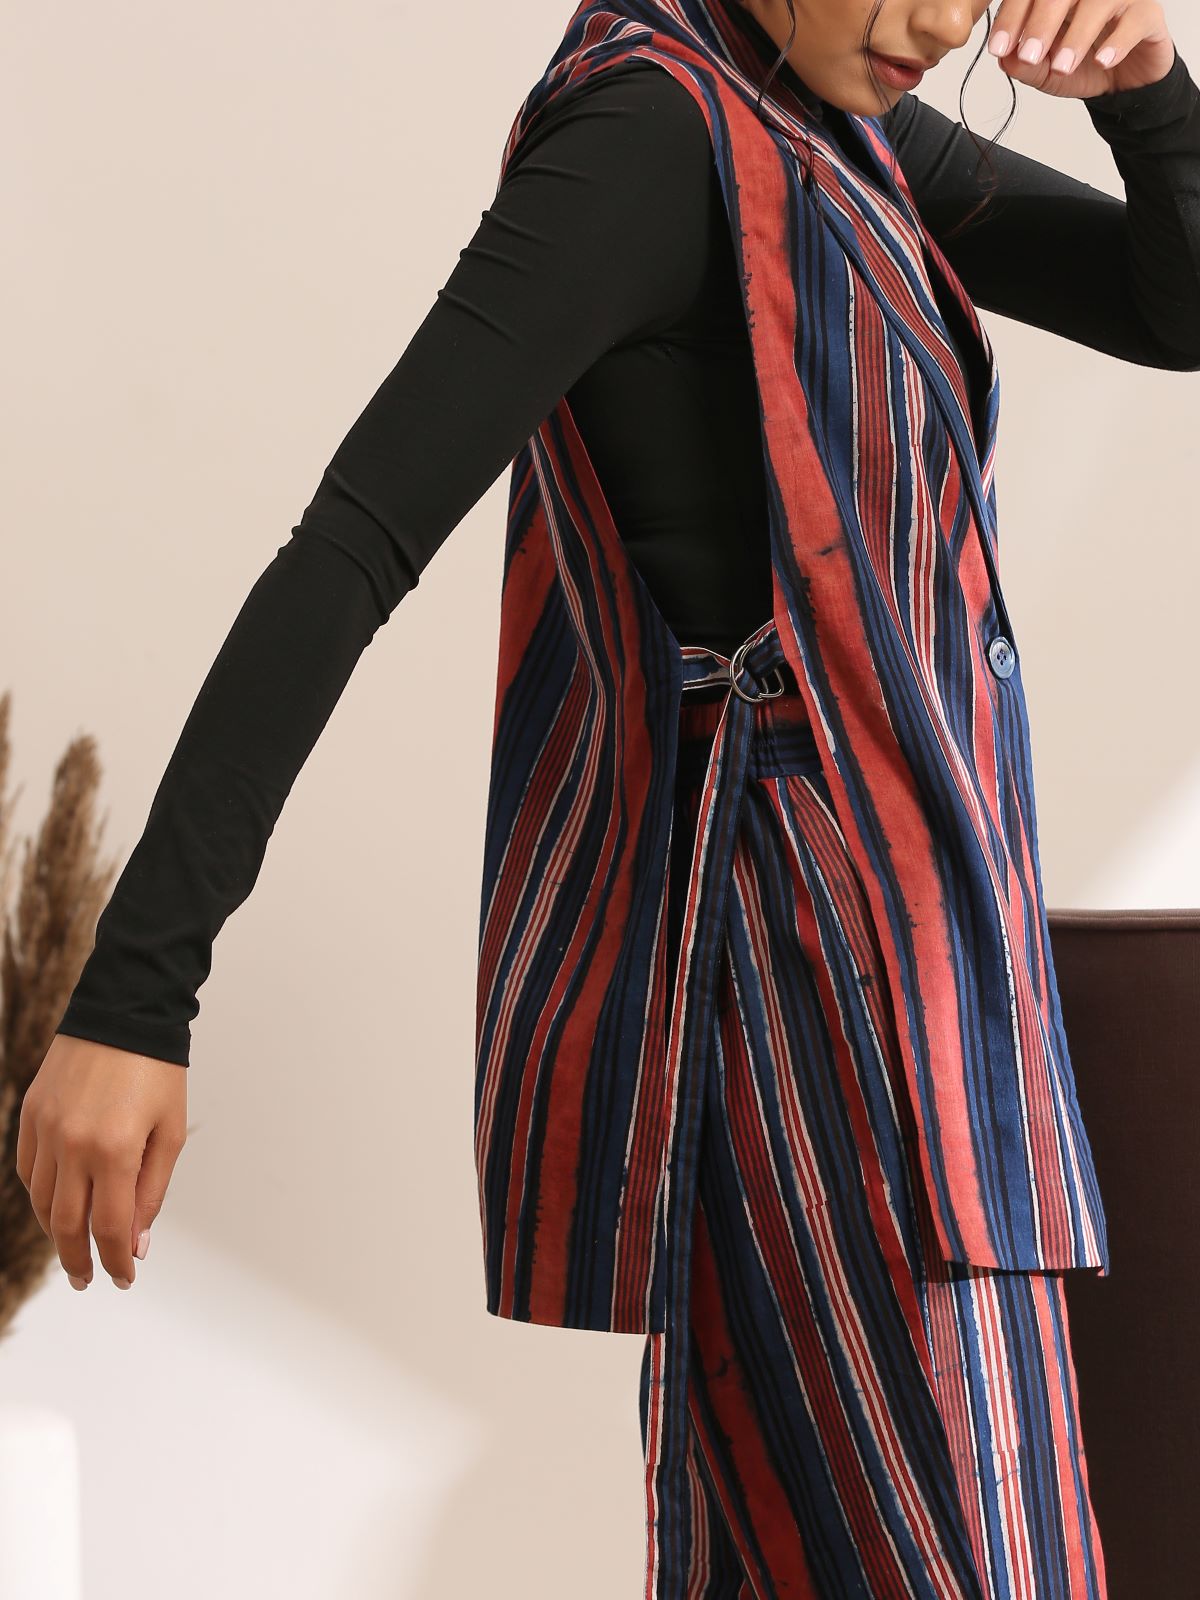 Zoey- Red & blue striped coord set